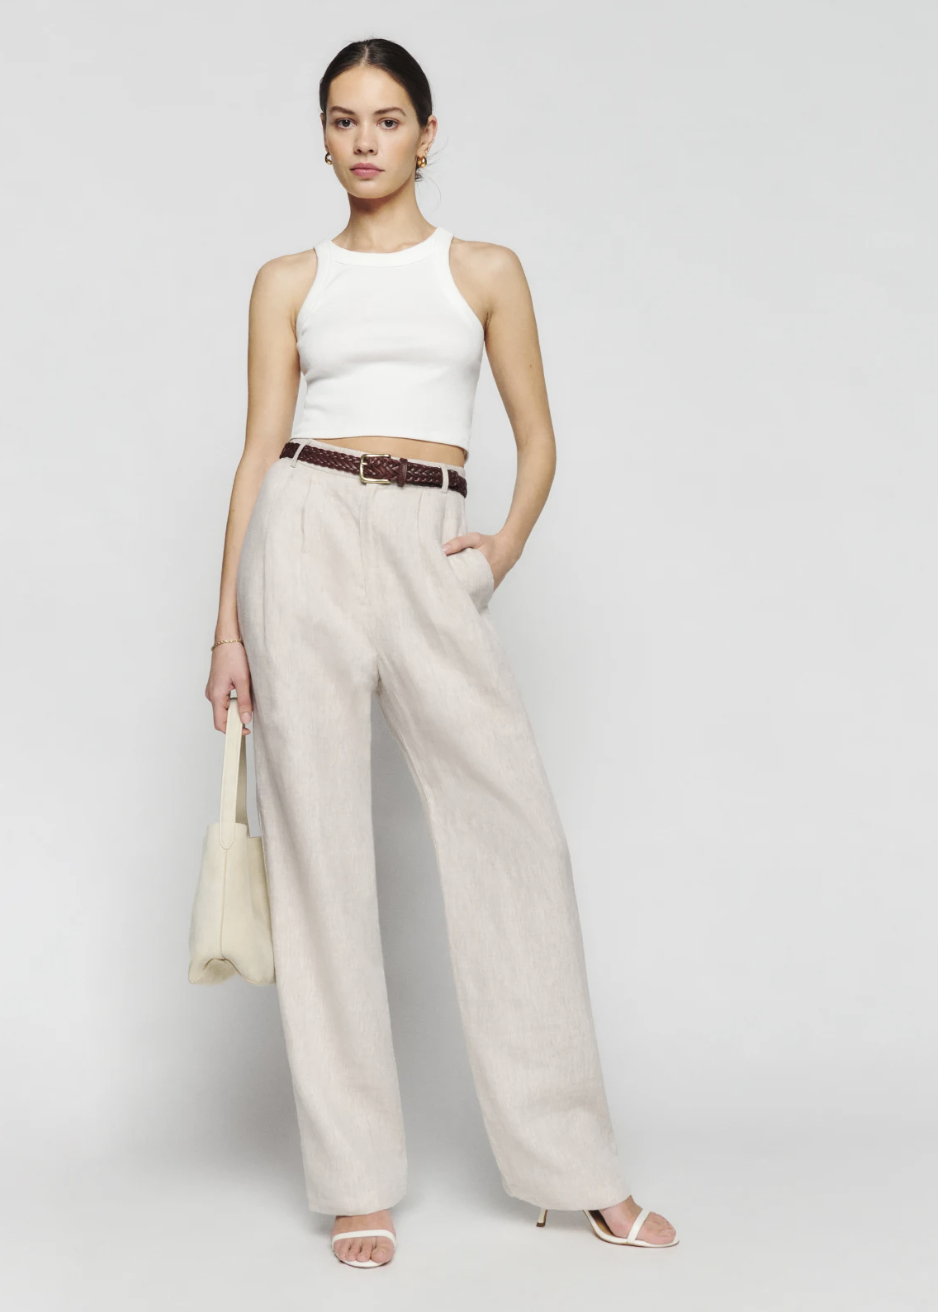 Slim Ankle Linen Trousers, Linen Pants High Waisted, Women Pants With Belt, Tapered  Linen Pants 